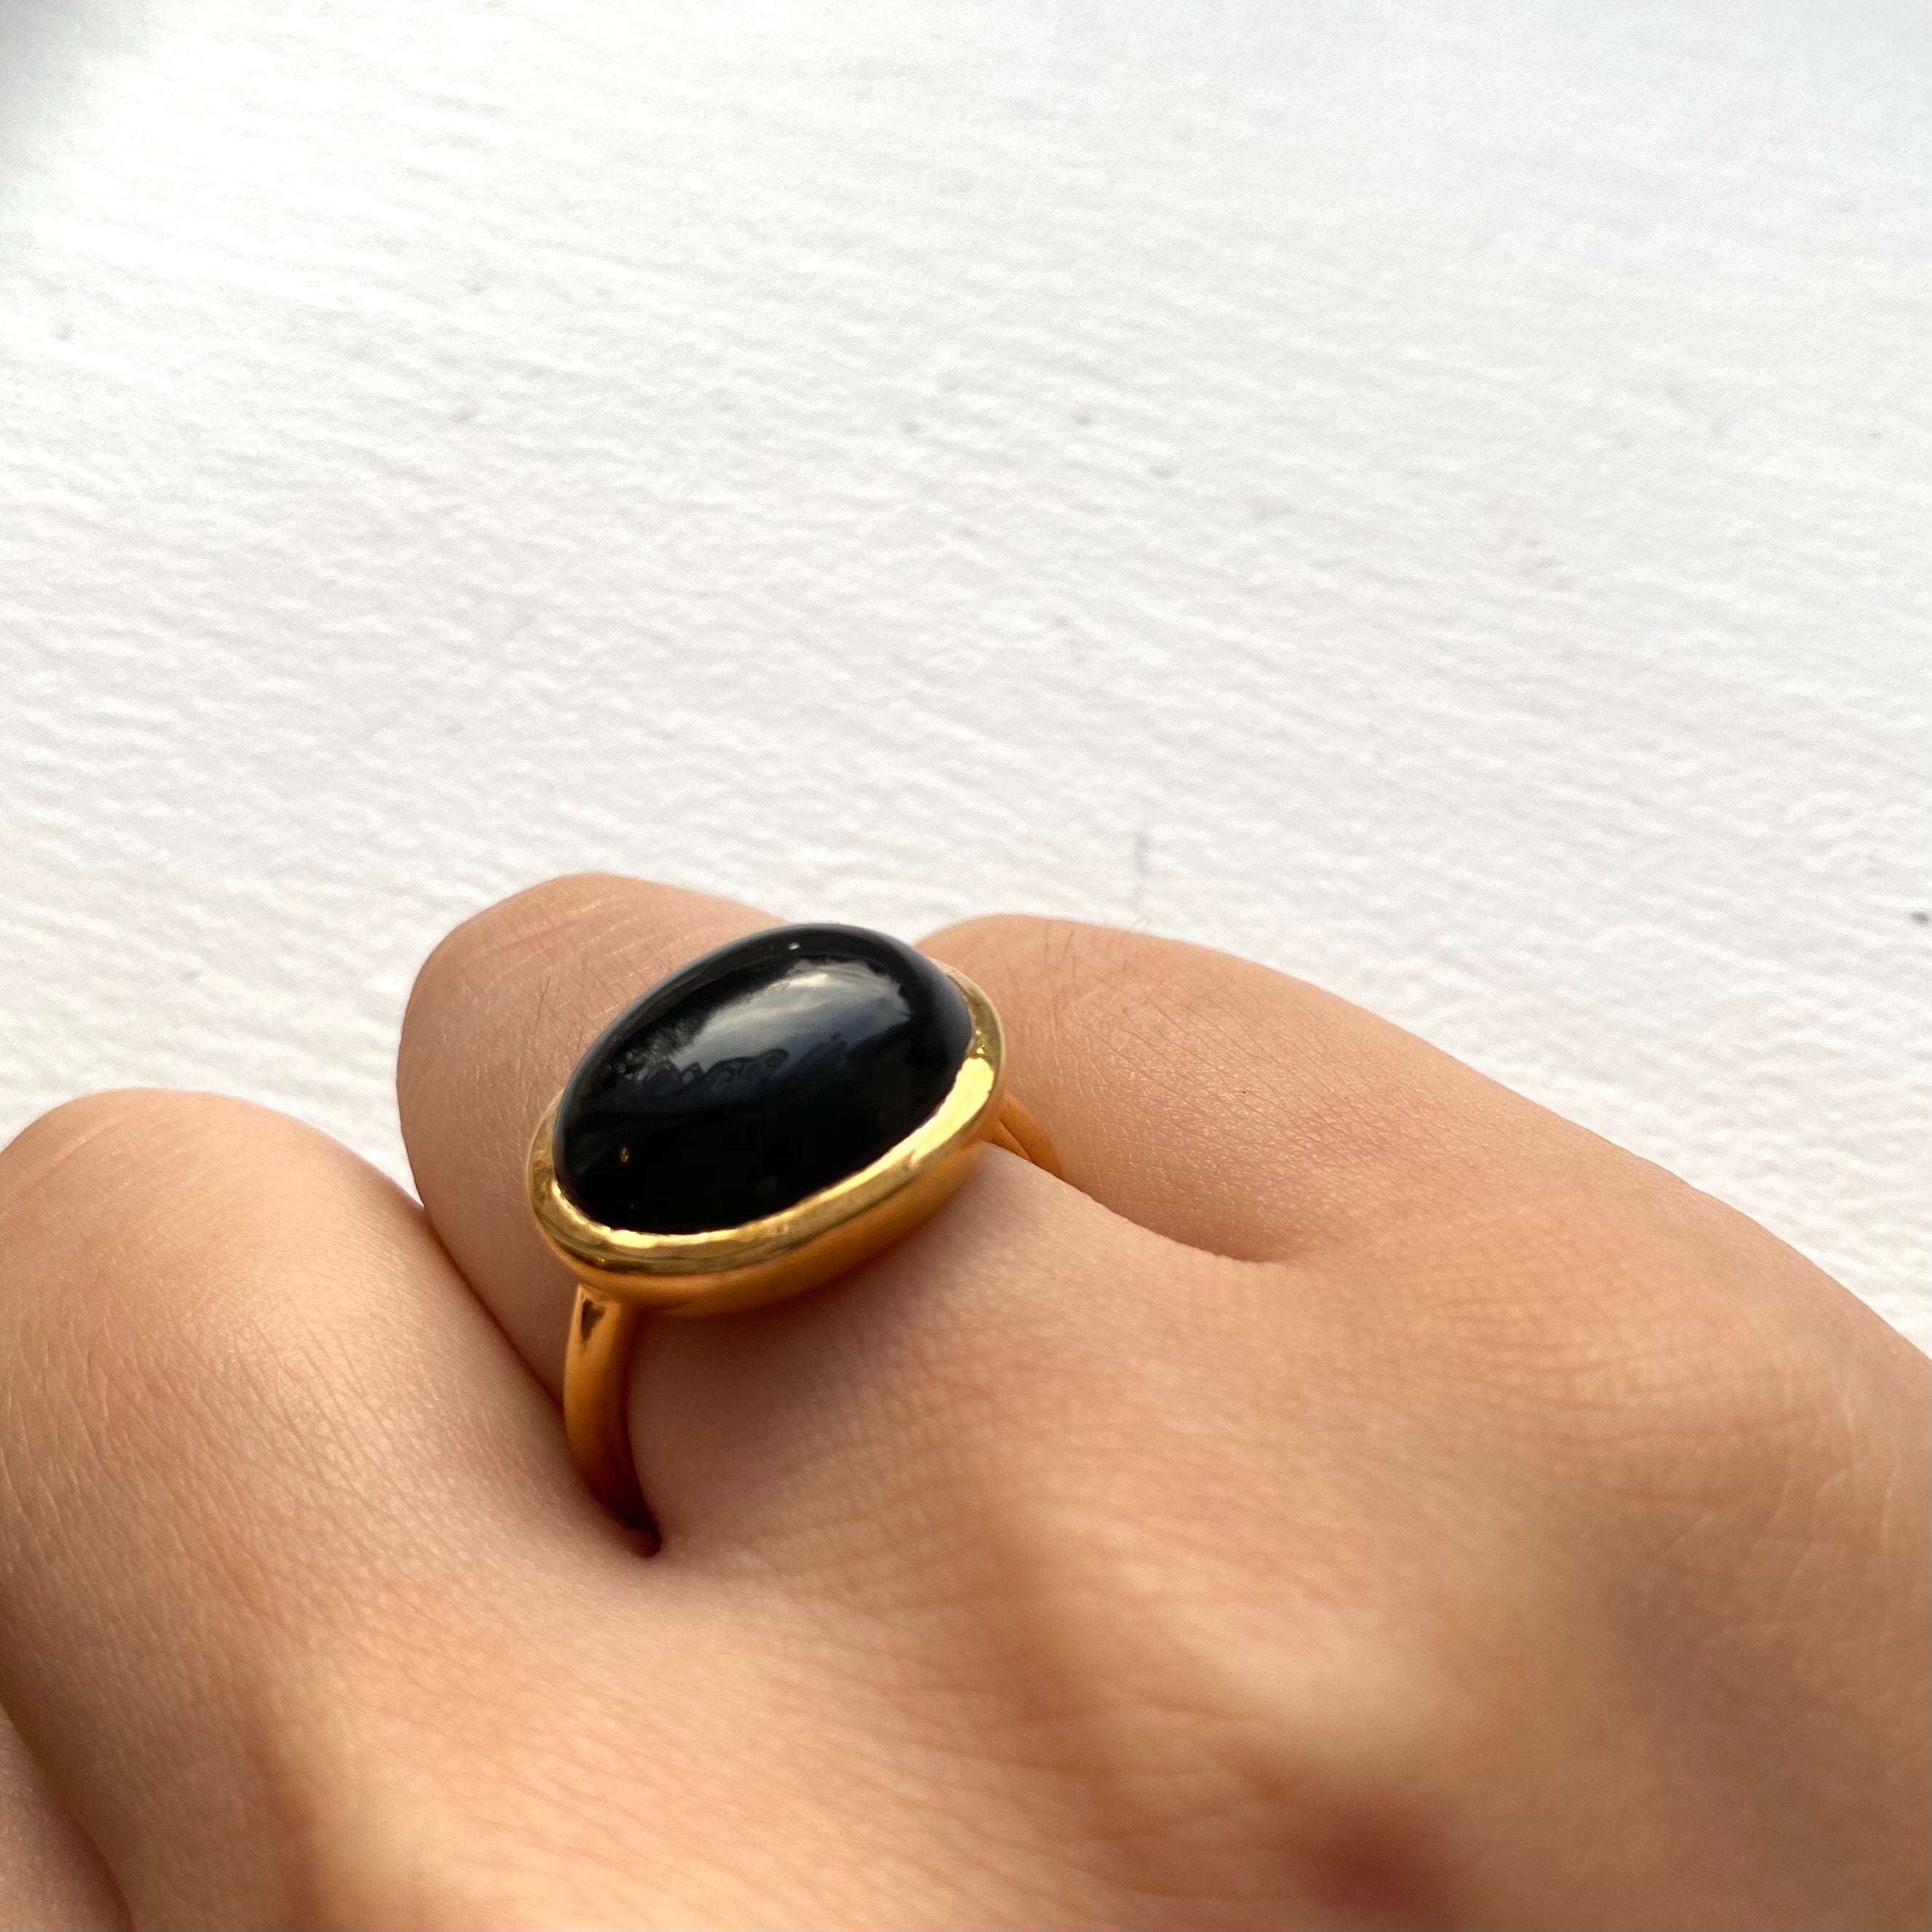 Cabochon Oval Cut Natural Gemstone Gold Plated Sterling Silver Ring - Black Onyx